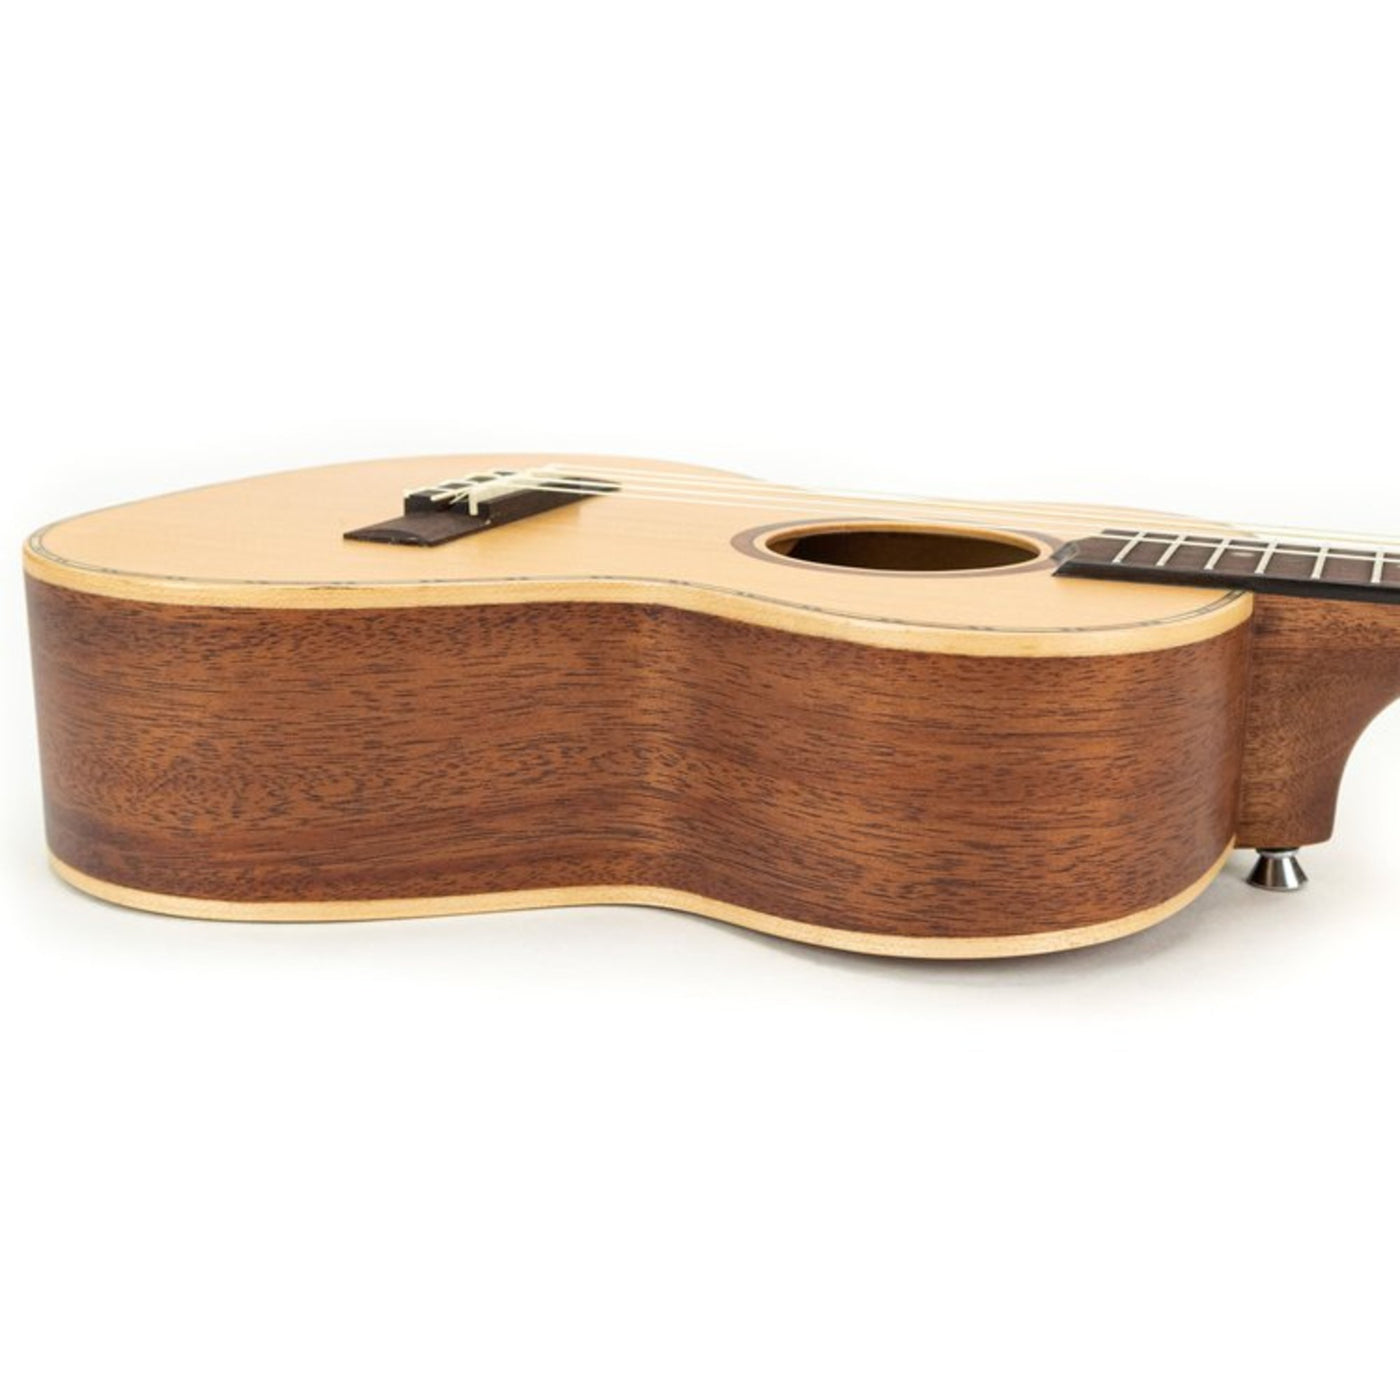 Lanikai CDST-T 4 String Ukulele, Tenor Cedar Solid Top Ukulele, with Deluxe Grover Tuners, Natural